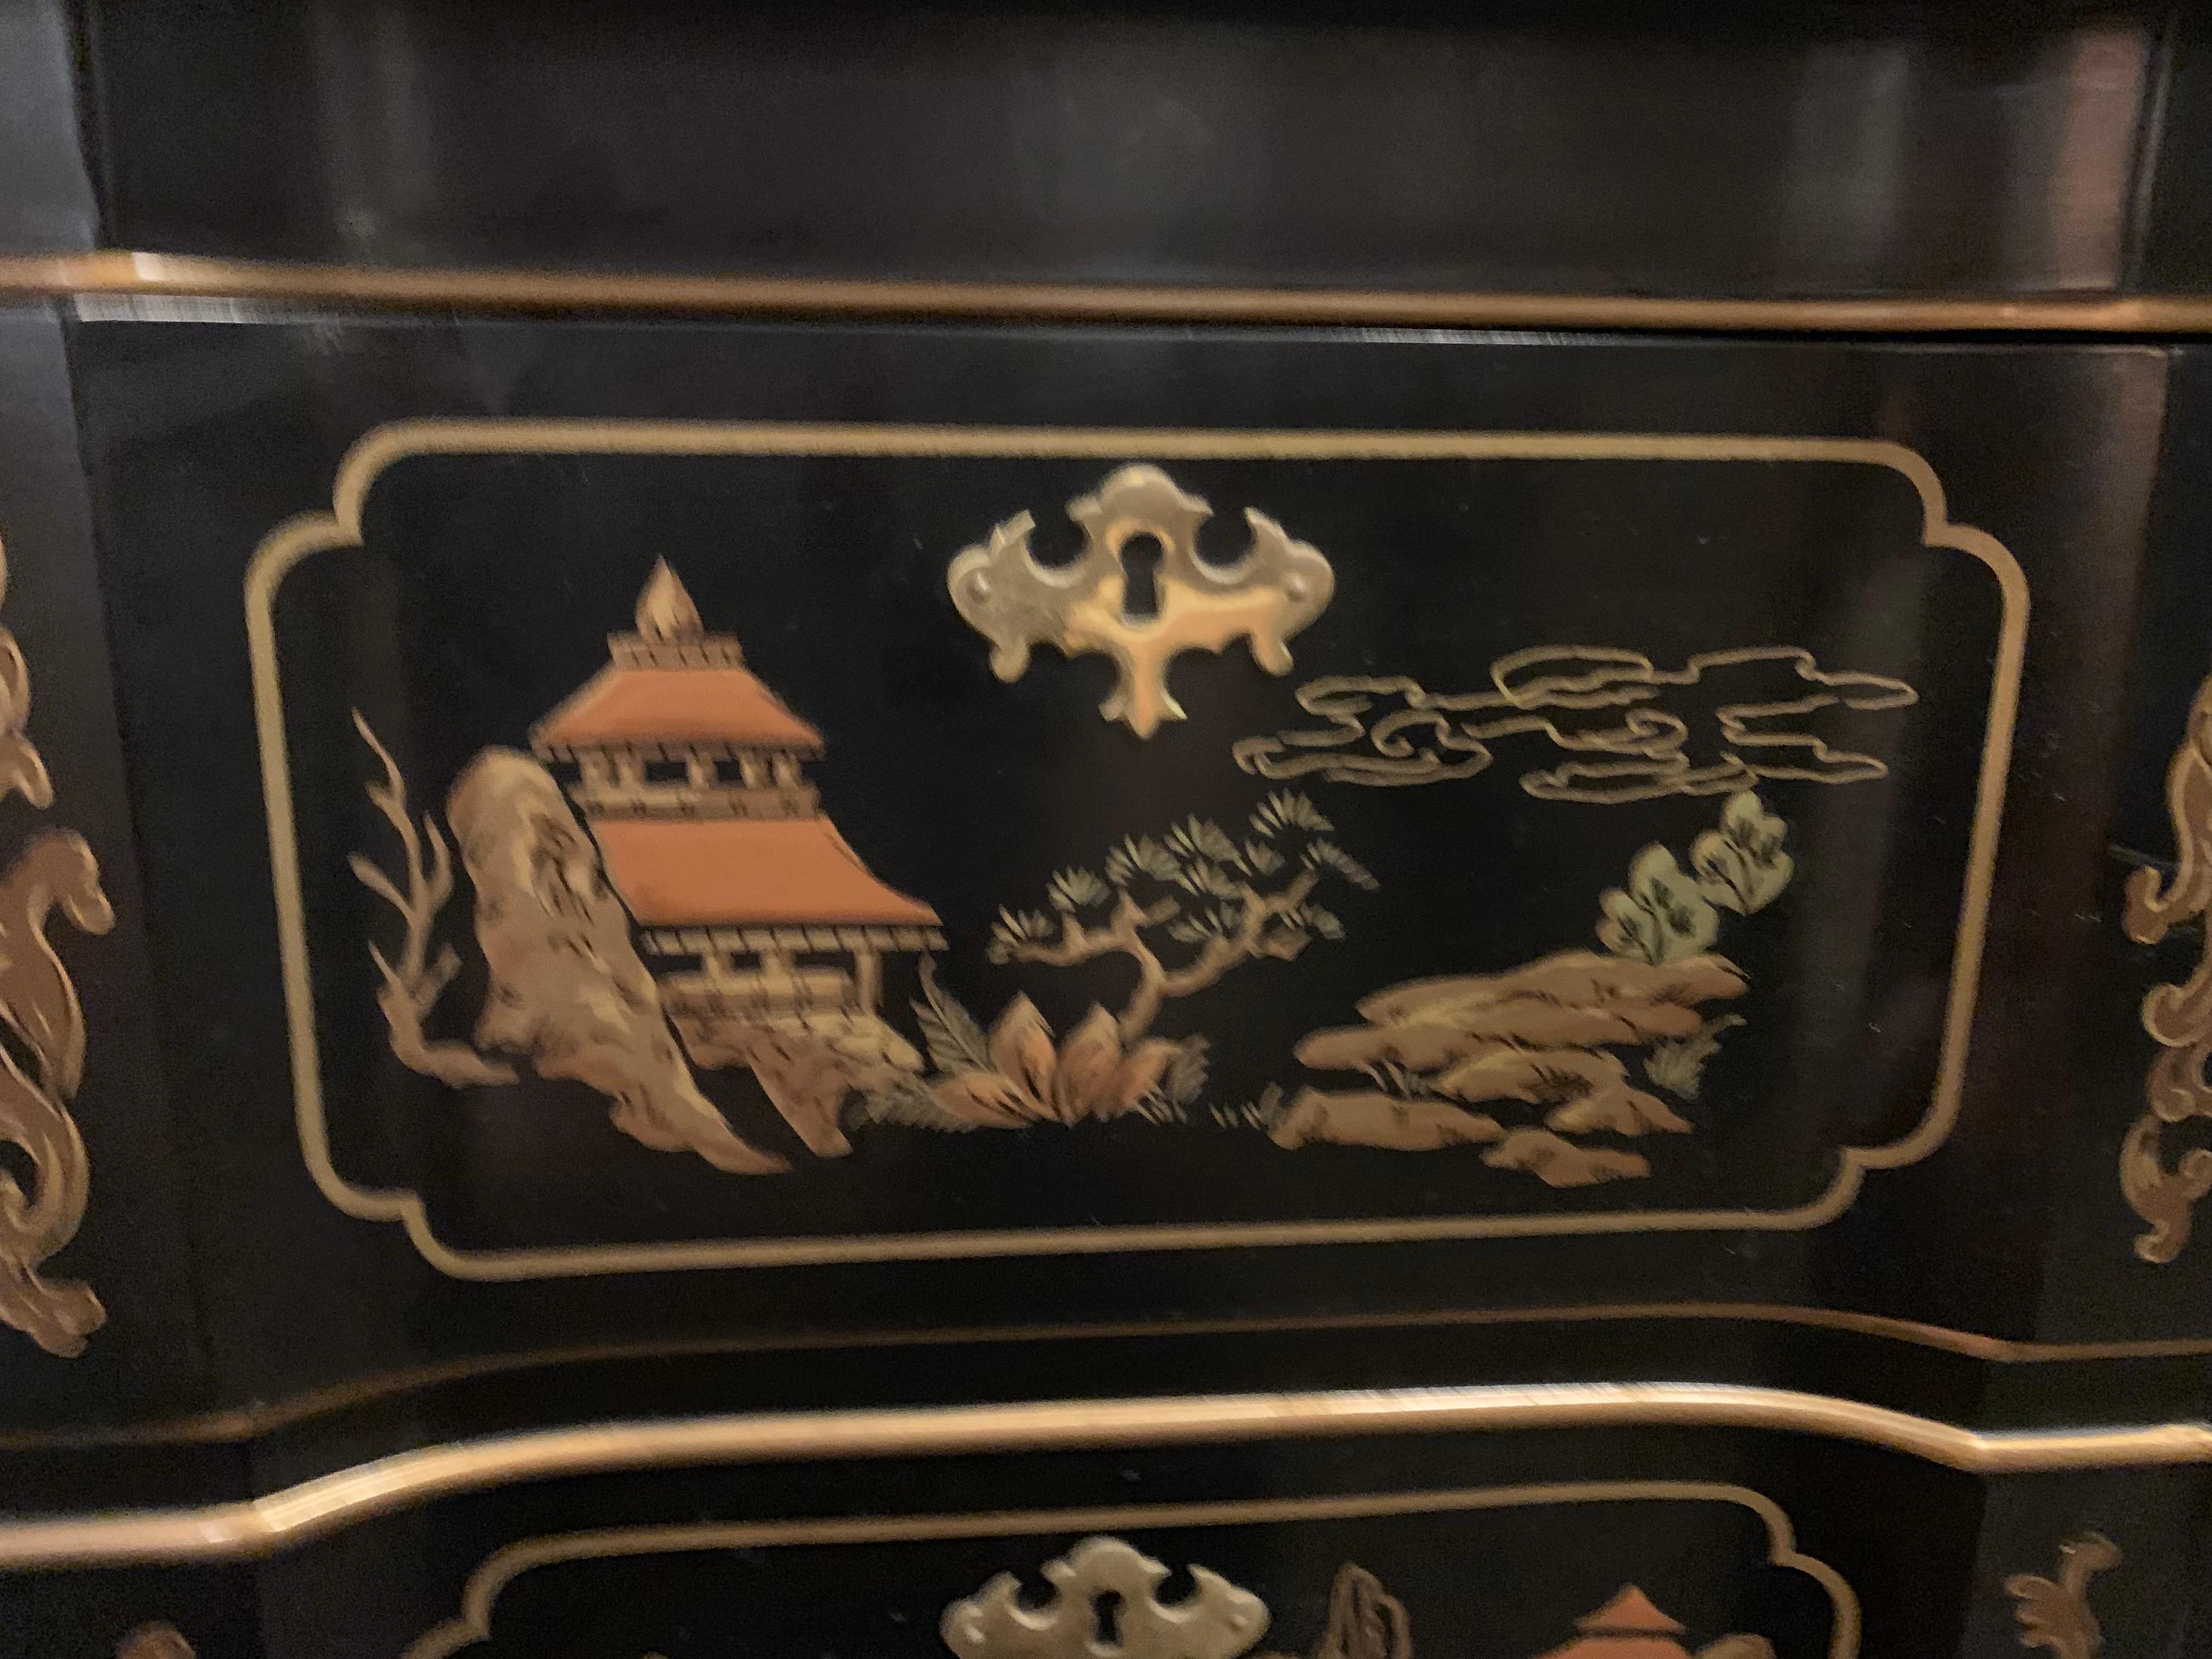 A chinoiserie style three-drawer dresser in black with gold painted accents and vignettes throughout. Drawers feature three painted scenes each and include figures, landscapes, and architectural elements. Sides of the dresser are also illustrated,